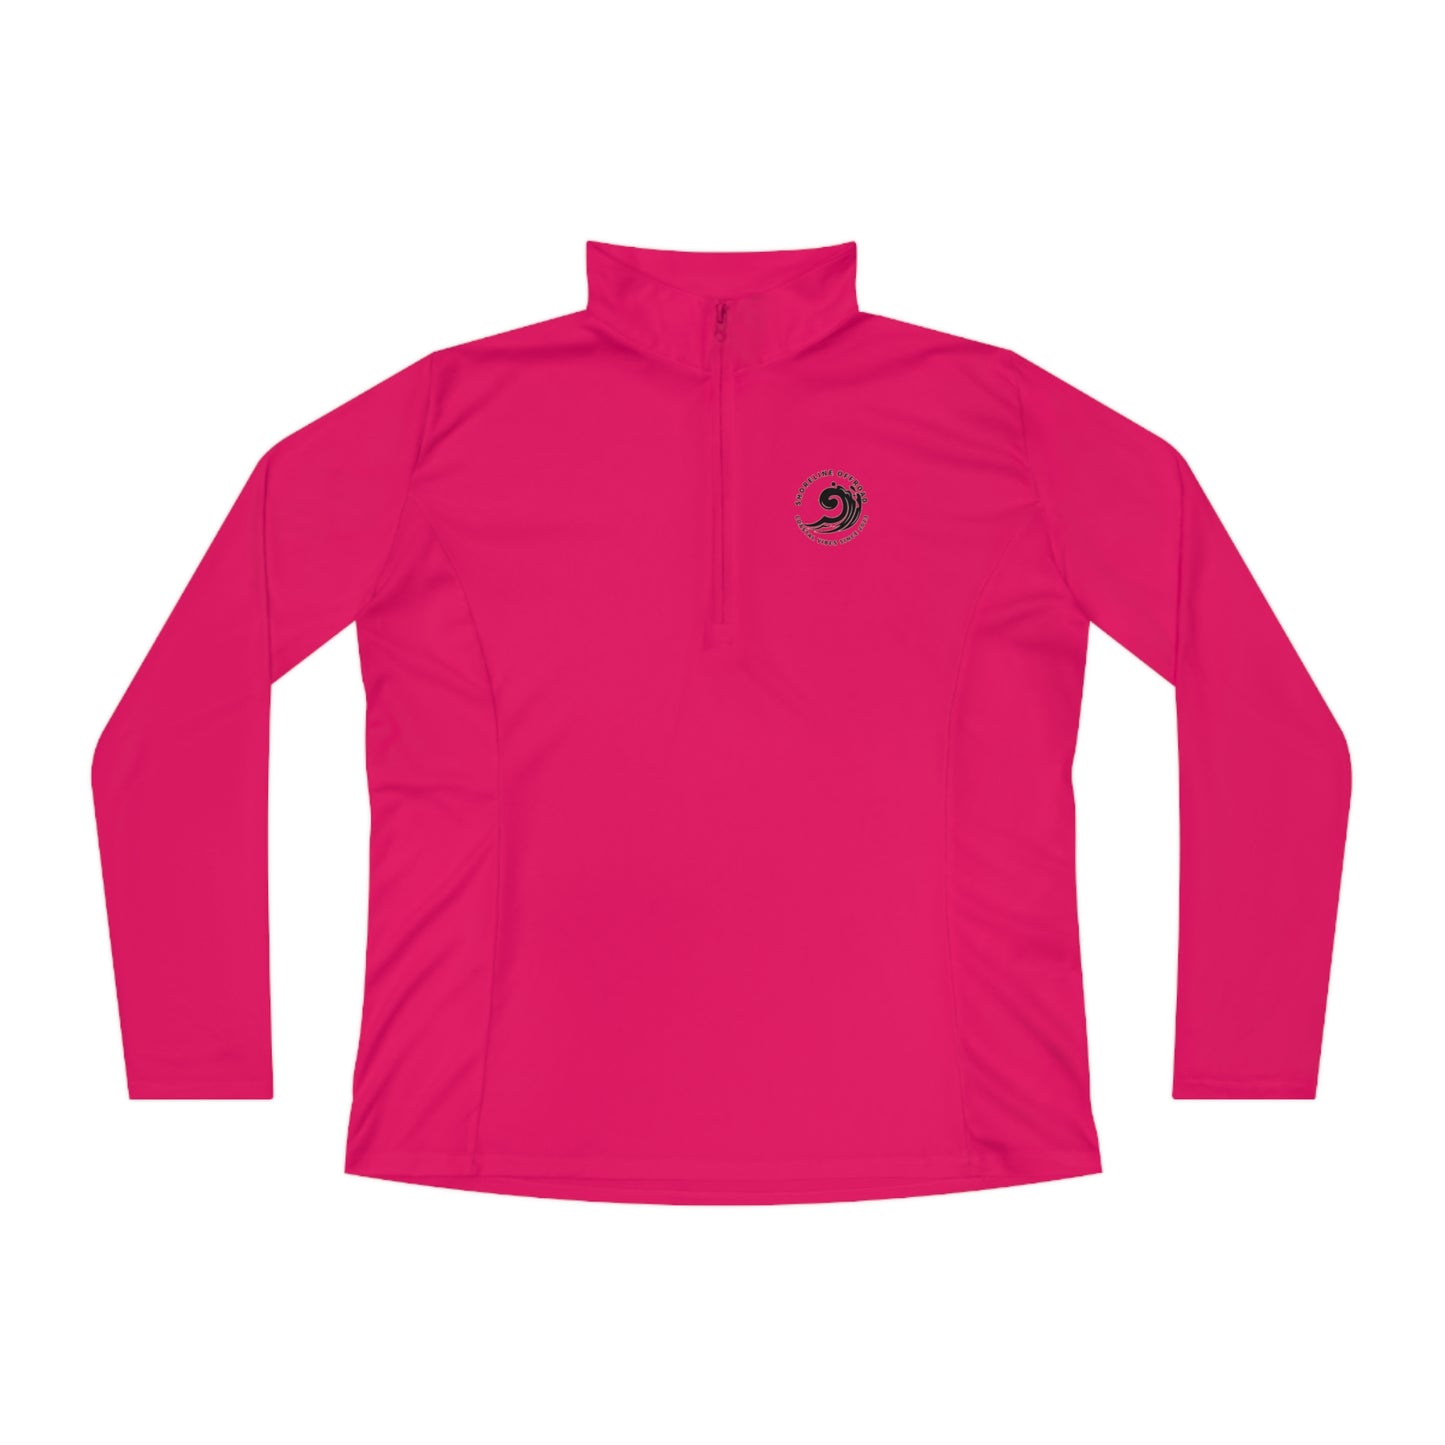 a pink shirt with a black and white logo on it